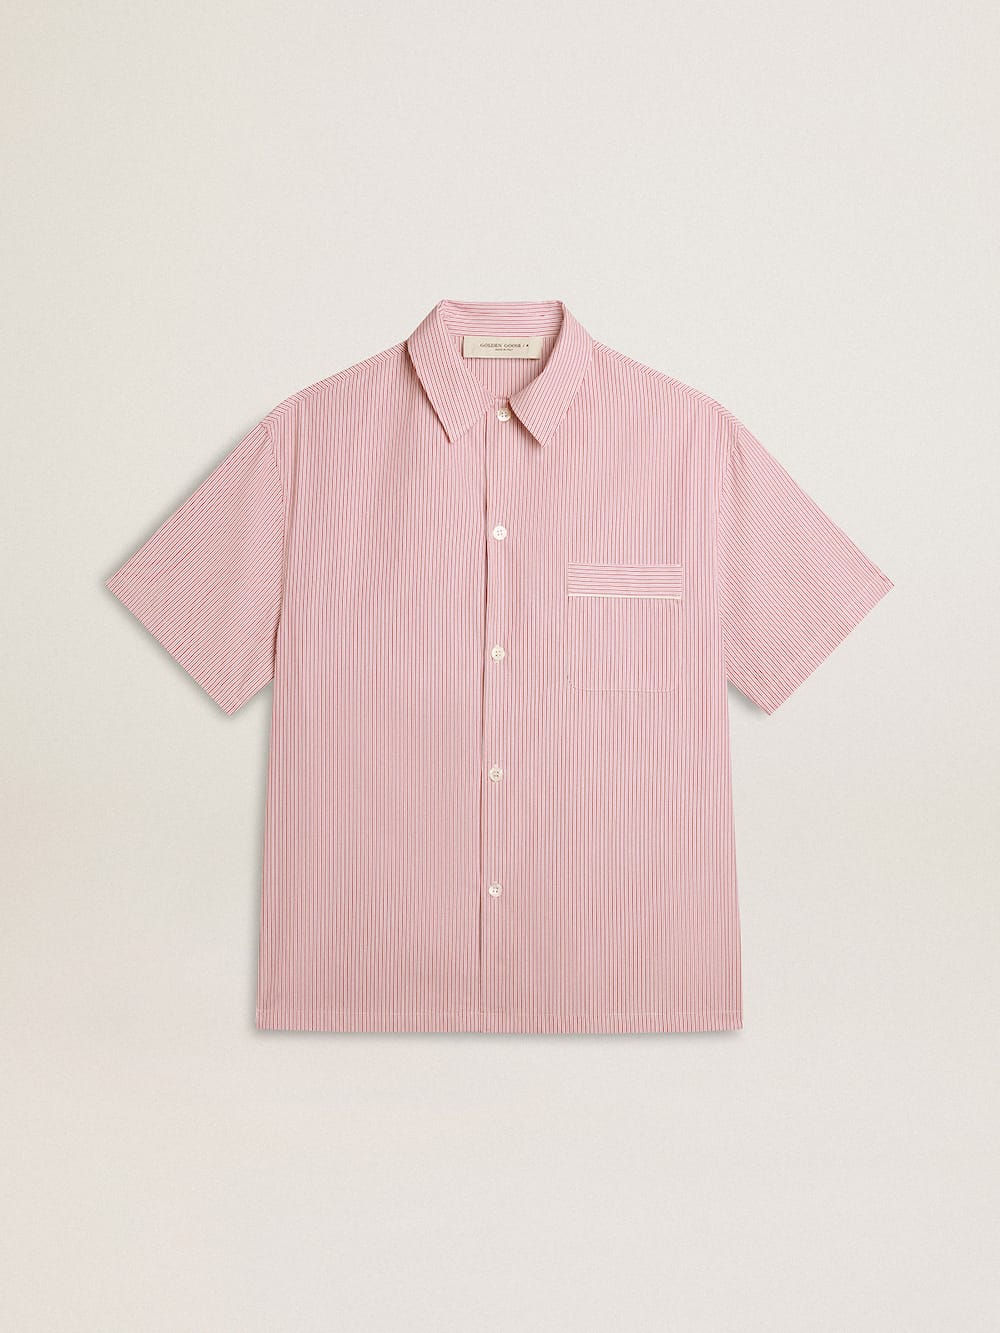 Golden Goose - Men's shirt in white and red striped cotton poplin in 